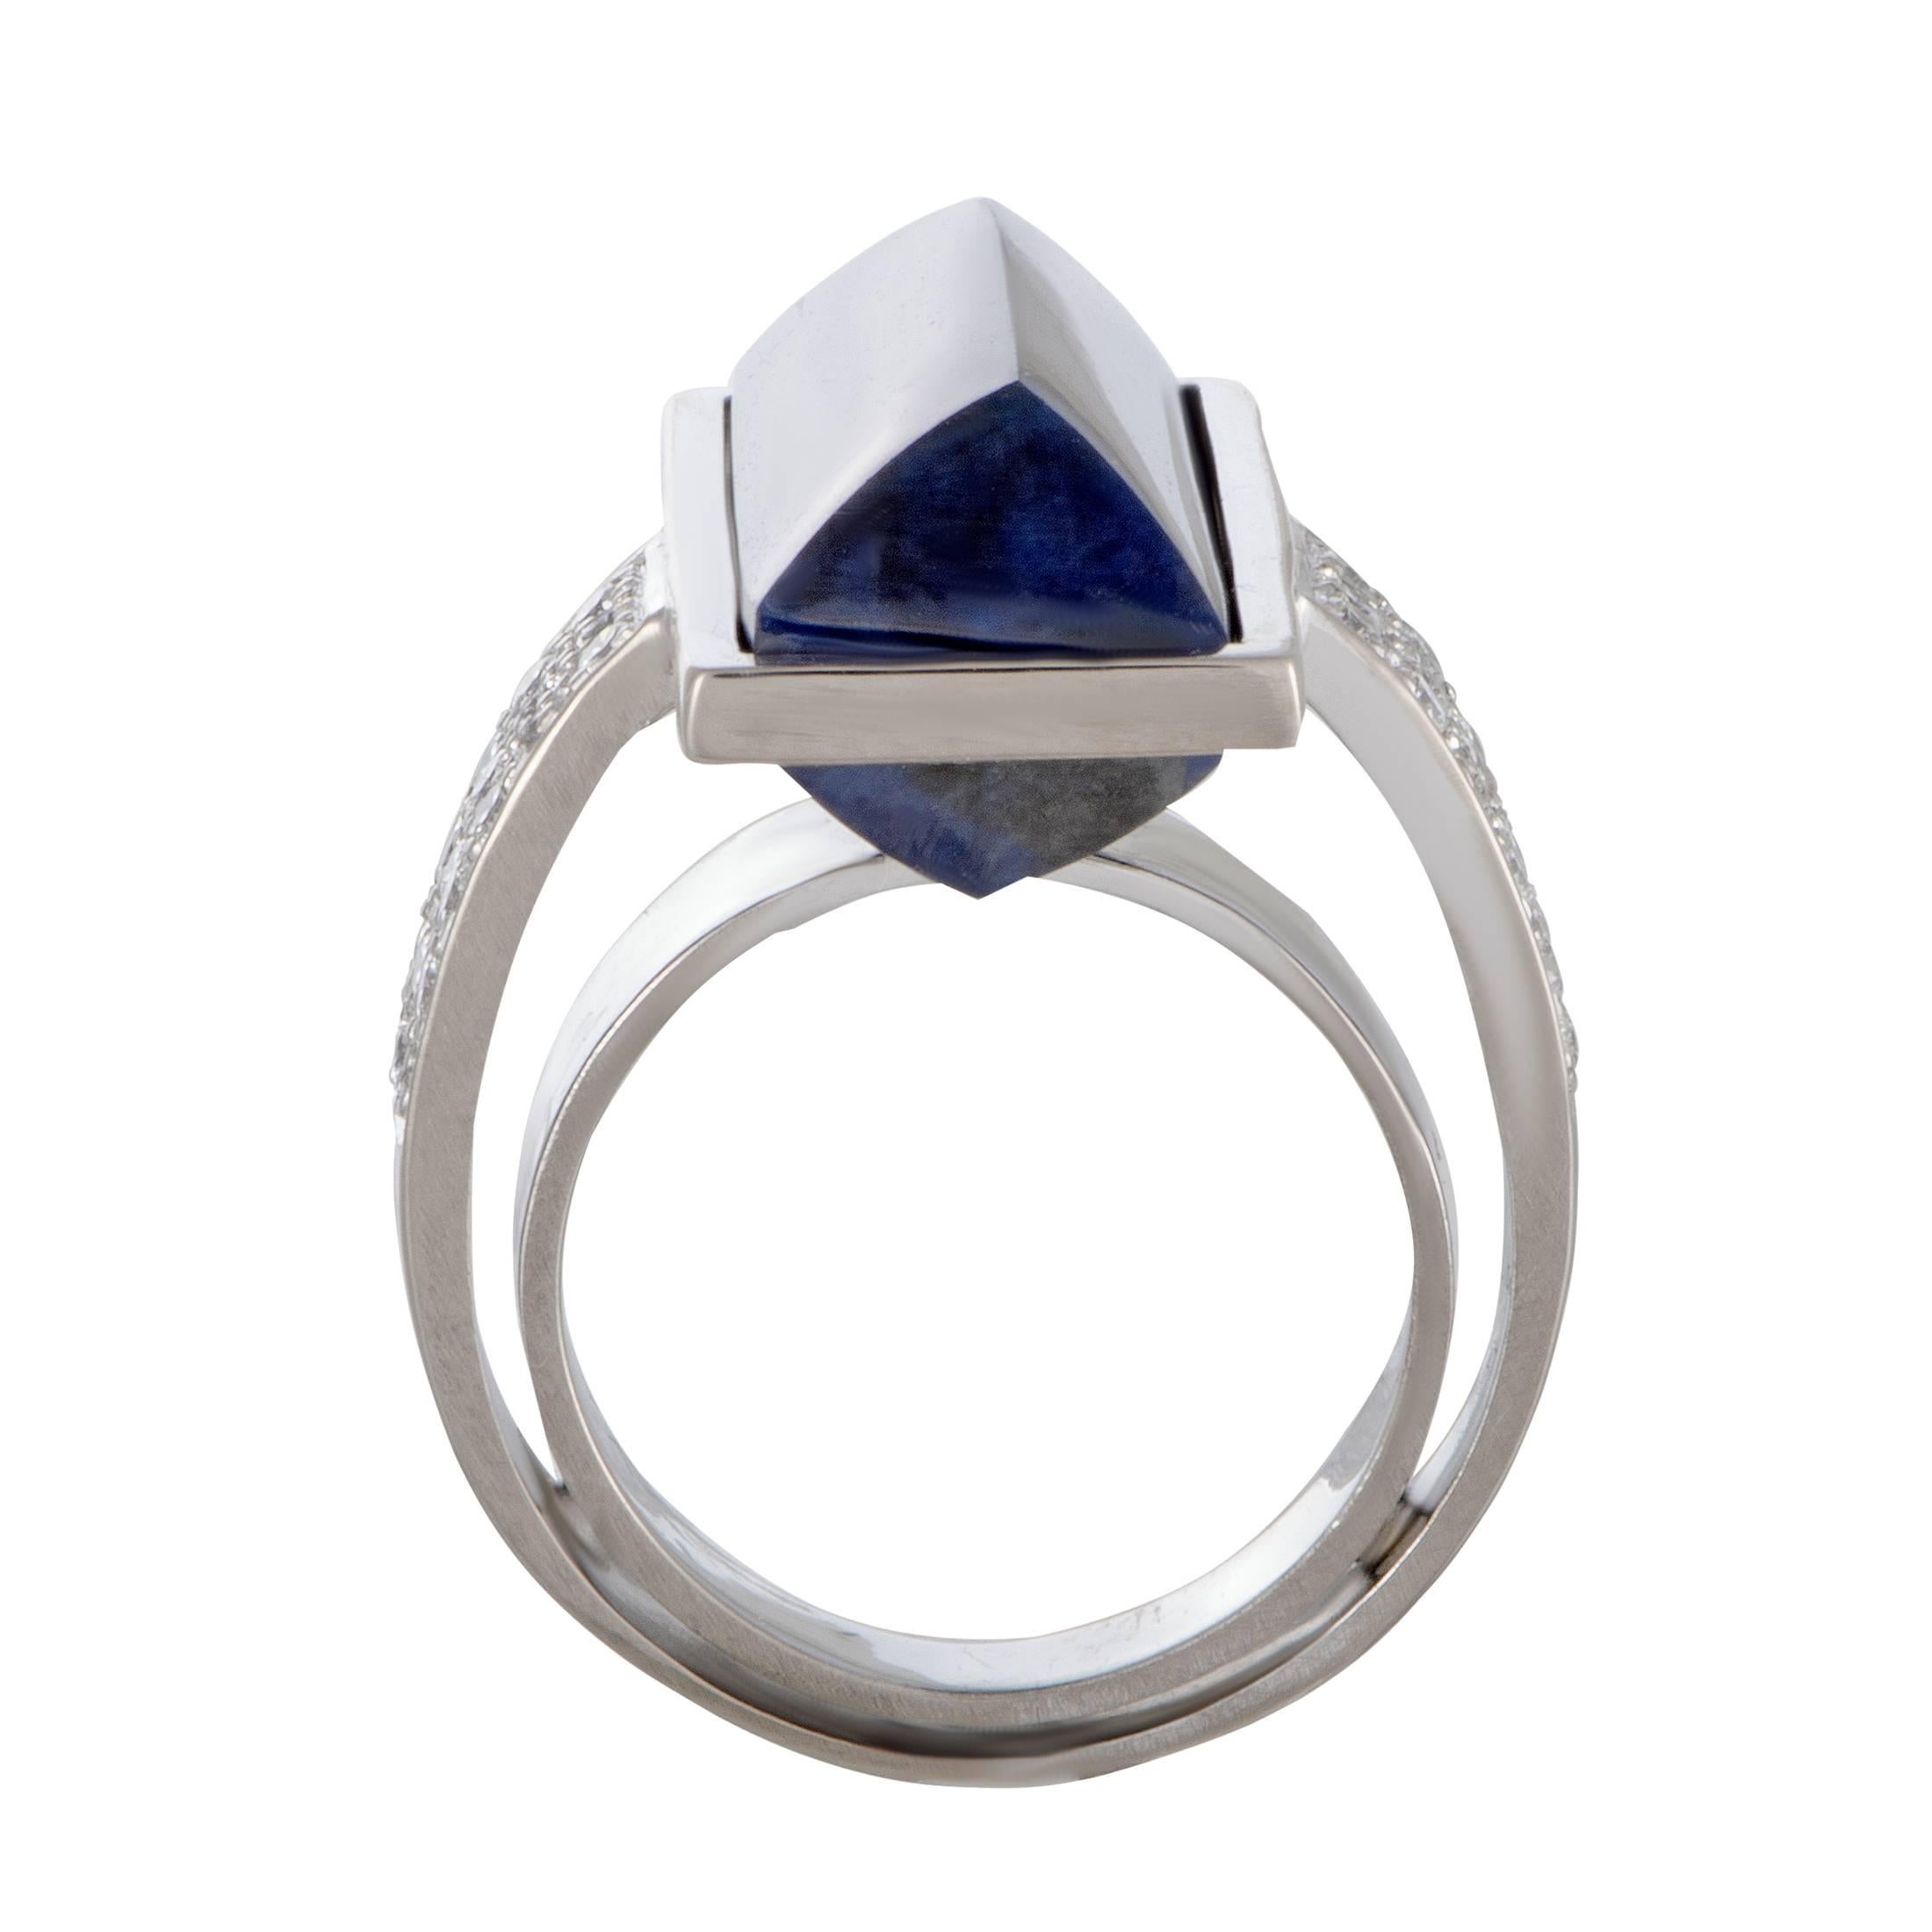 Designed by Vasari in an intriguingly unconventional manner, this spectacular ring offers an exceptionally fashionable appearance. Made of elegant 18K white gold, the ring is embellished with an eye-catching lapis lazuli and 0.85 carats of